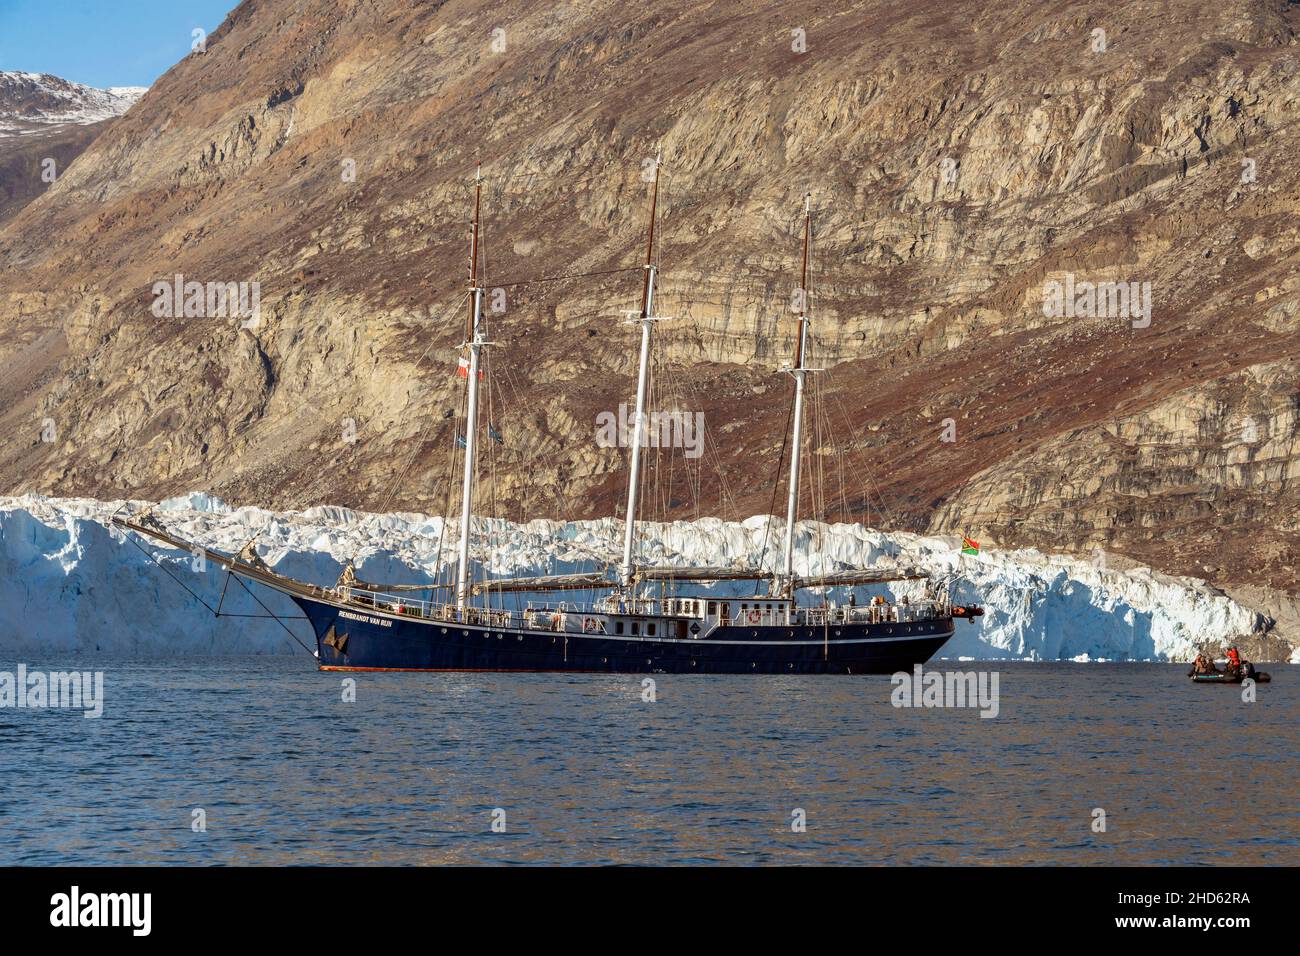 Rembrandt van Rijn anchored by the toe of the Rolige Brae Glacier with zodiac, Rodefjord, Scoresby Sund, Greenland Stock Photo